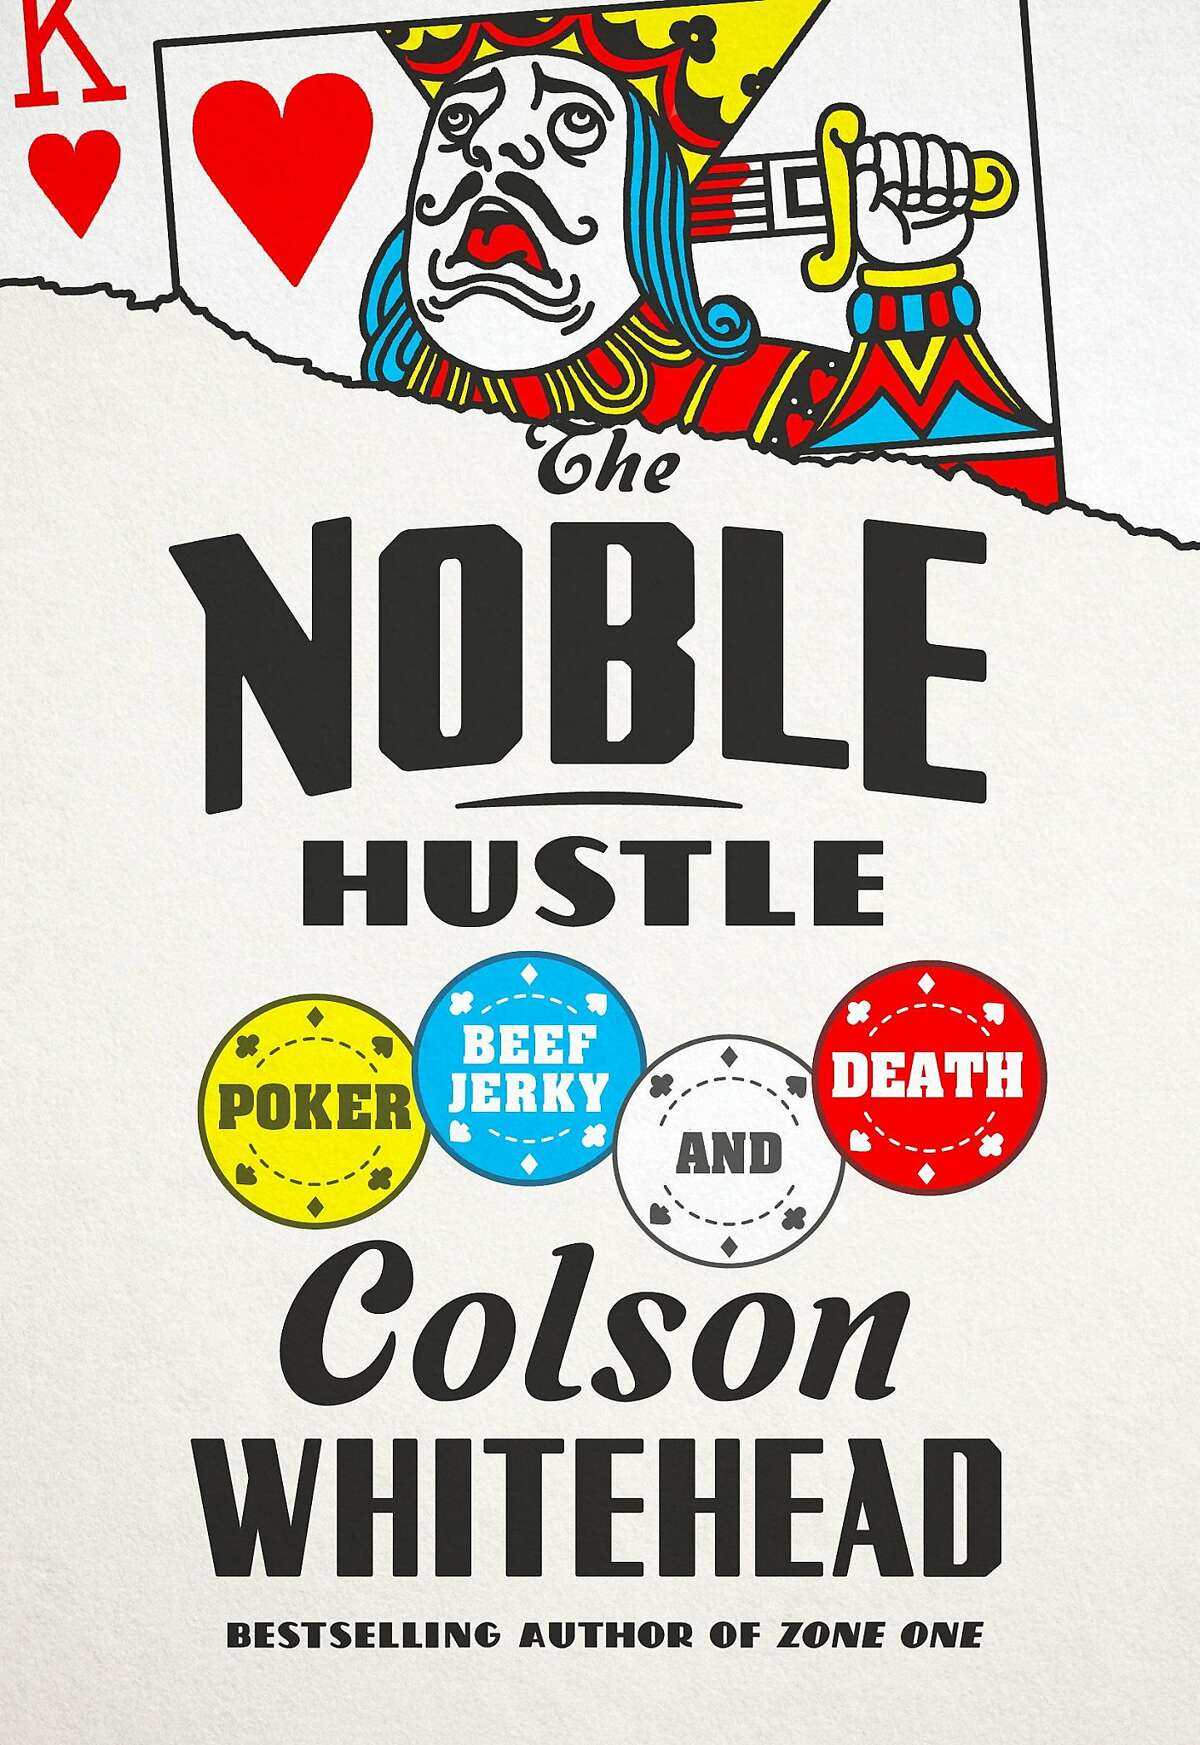 "The Noble Hustle: Poker, Beef Jerky, and Death," by Colson Whitehead